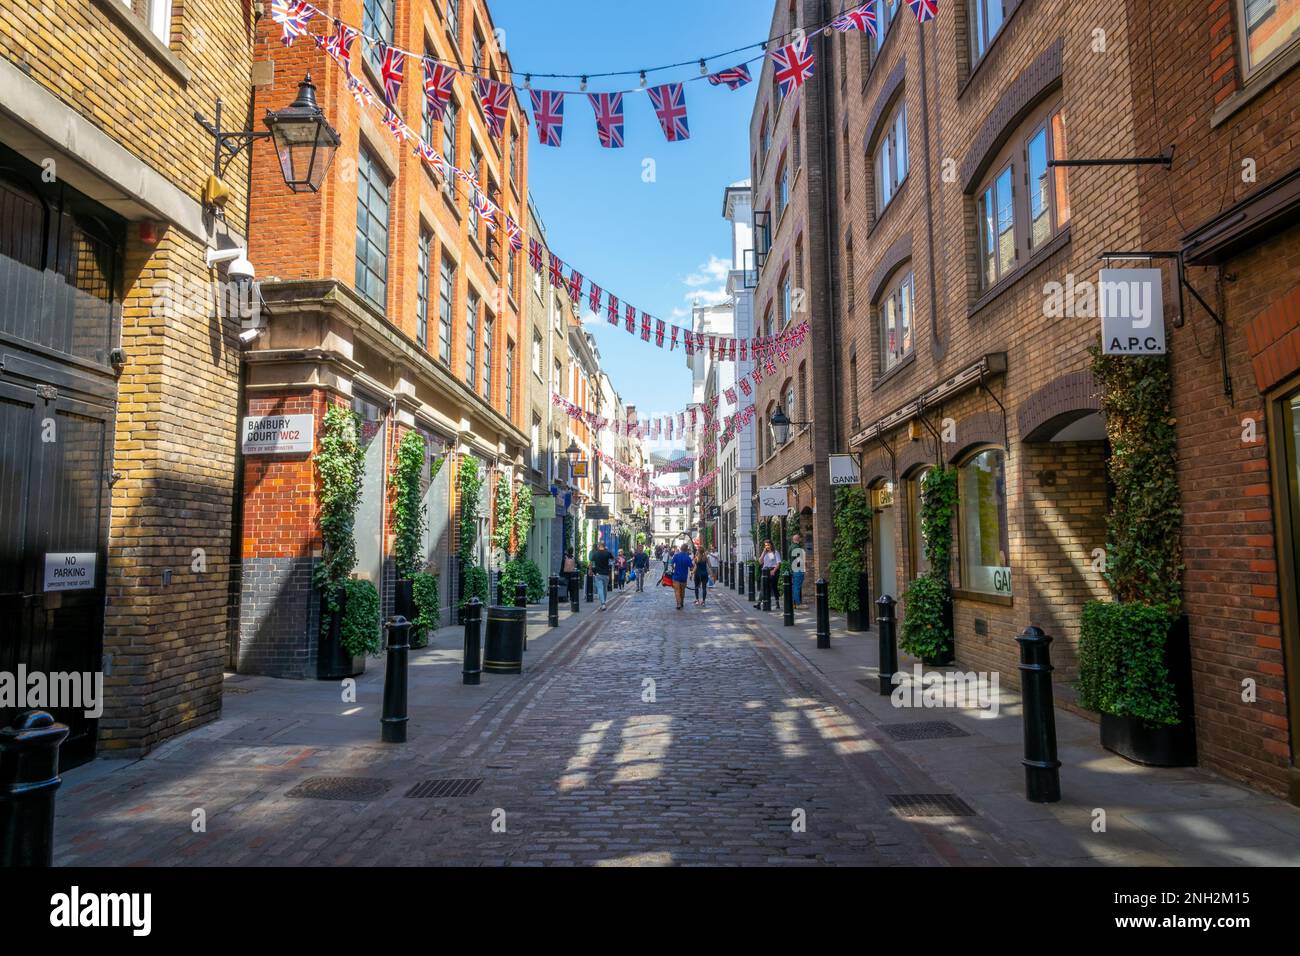 Floral street in Covent Garden, London UK Stock Photo